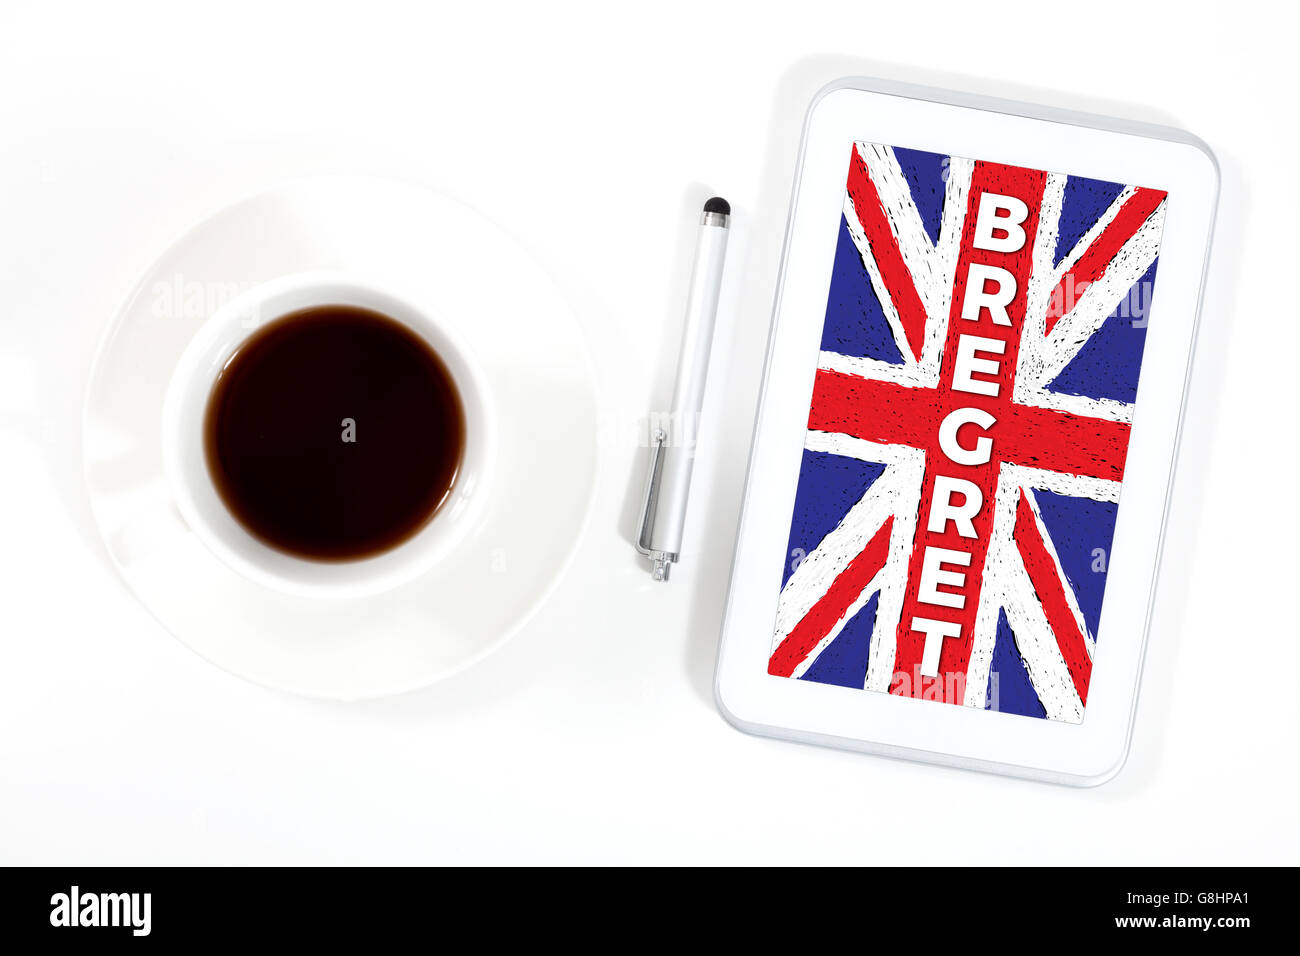 A computer tablet showing a message on the screen related to BREXIT Stock Photo